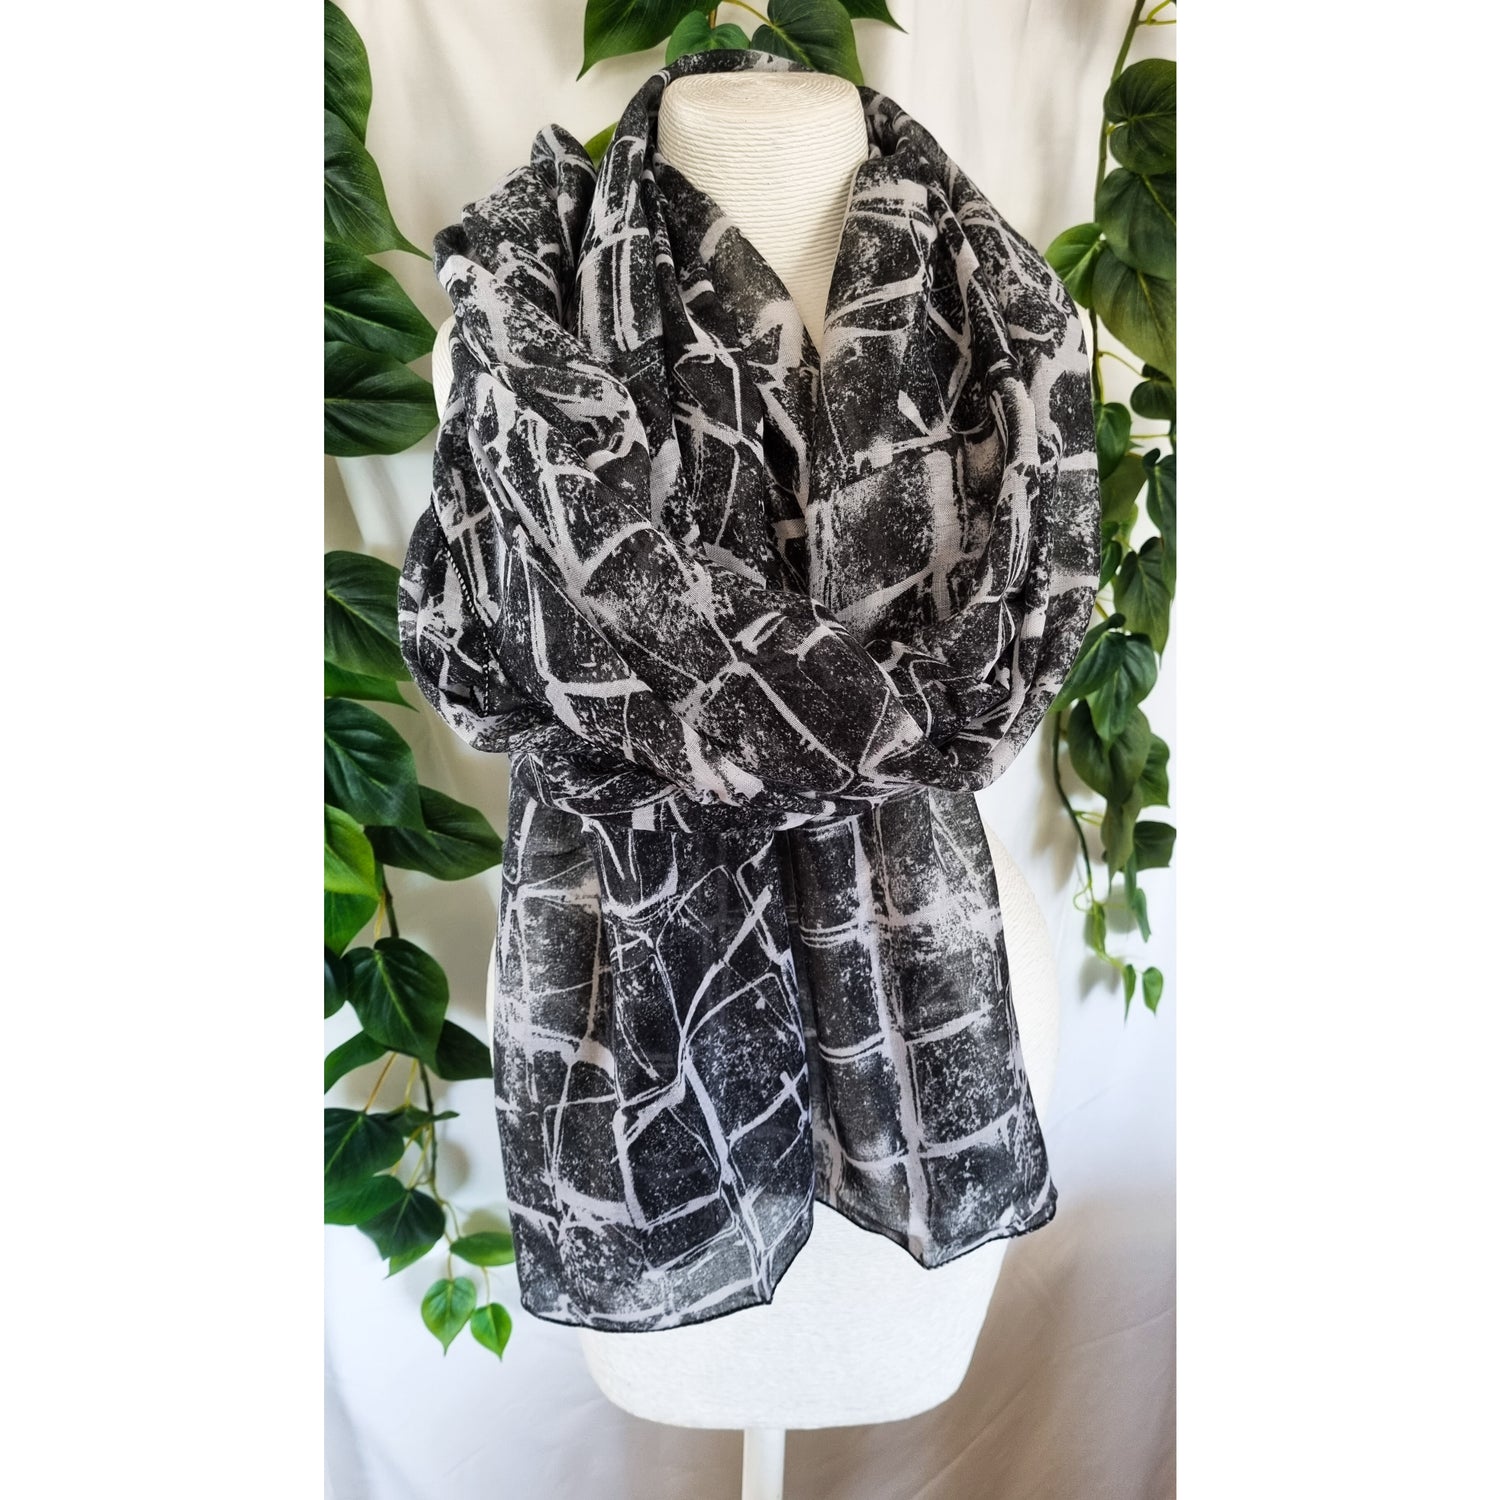 Viscose Scarf - Crinkle Black and White